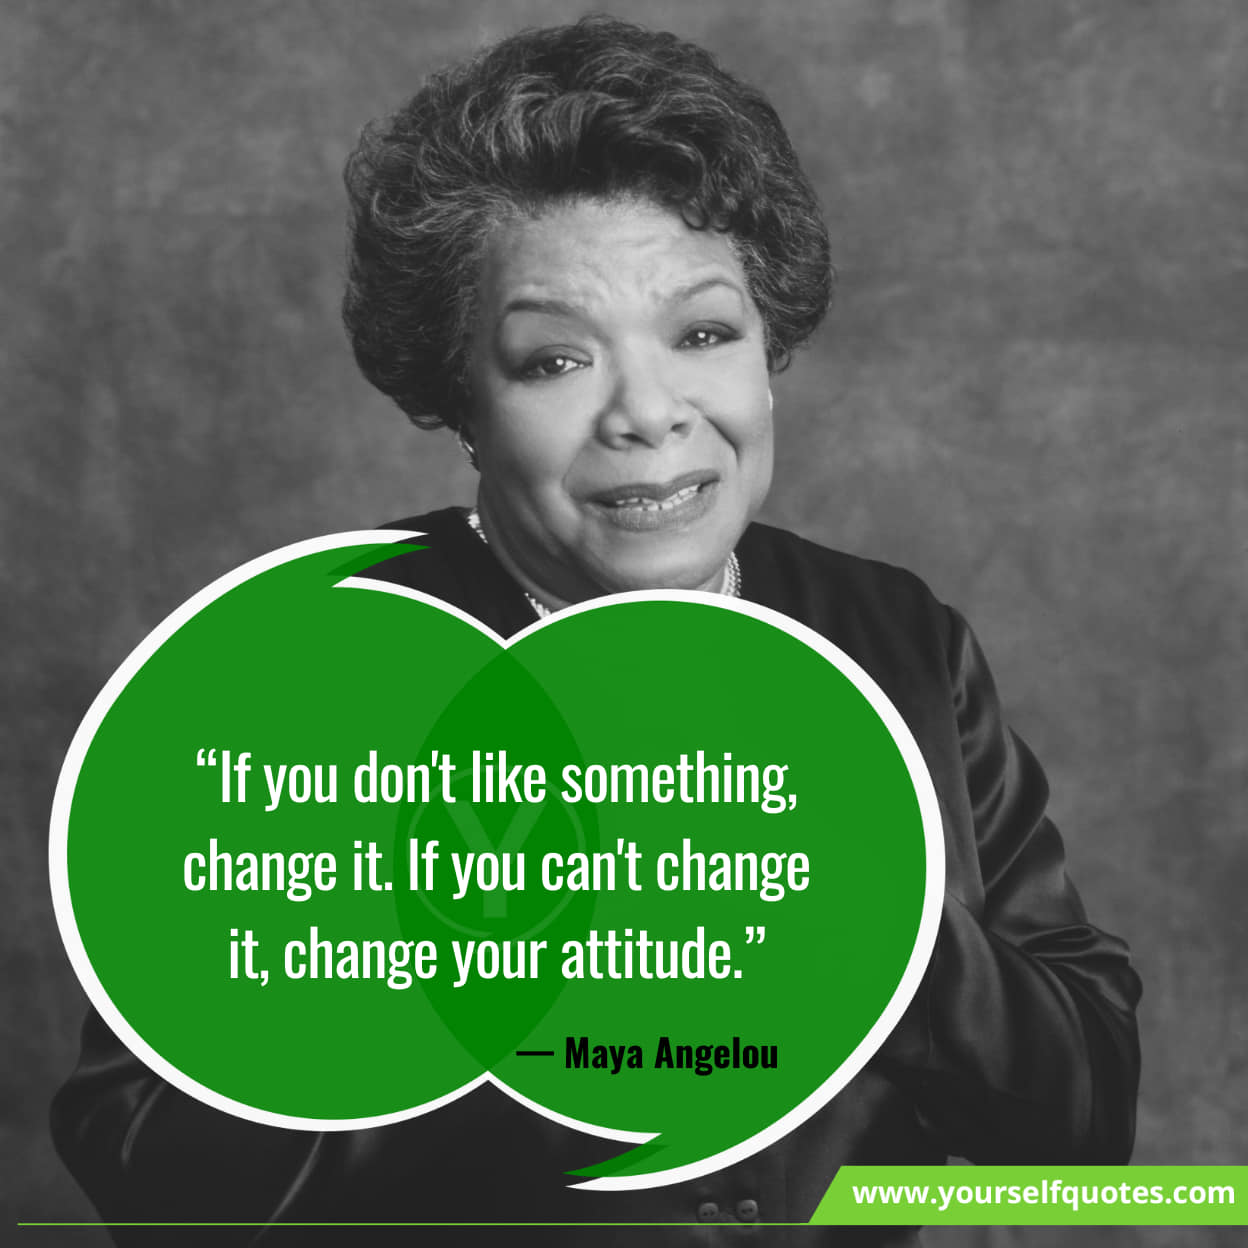 Maya Angelou quotes on the power of words